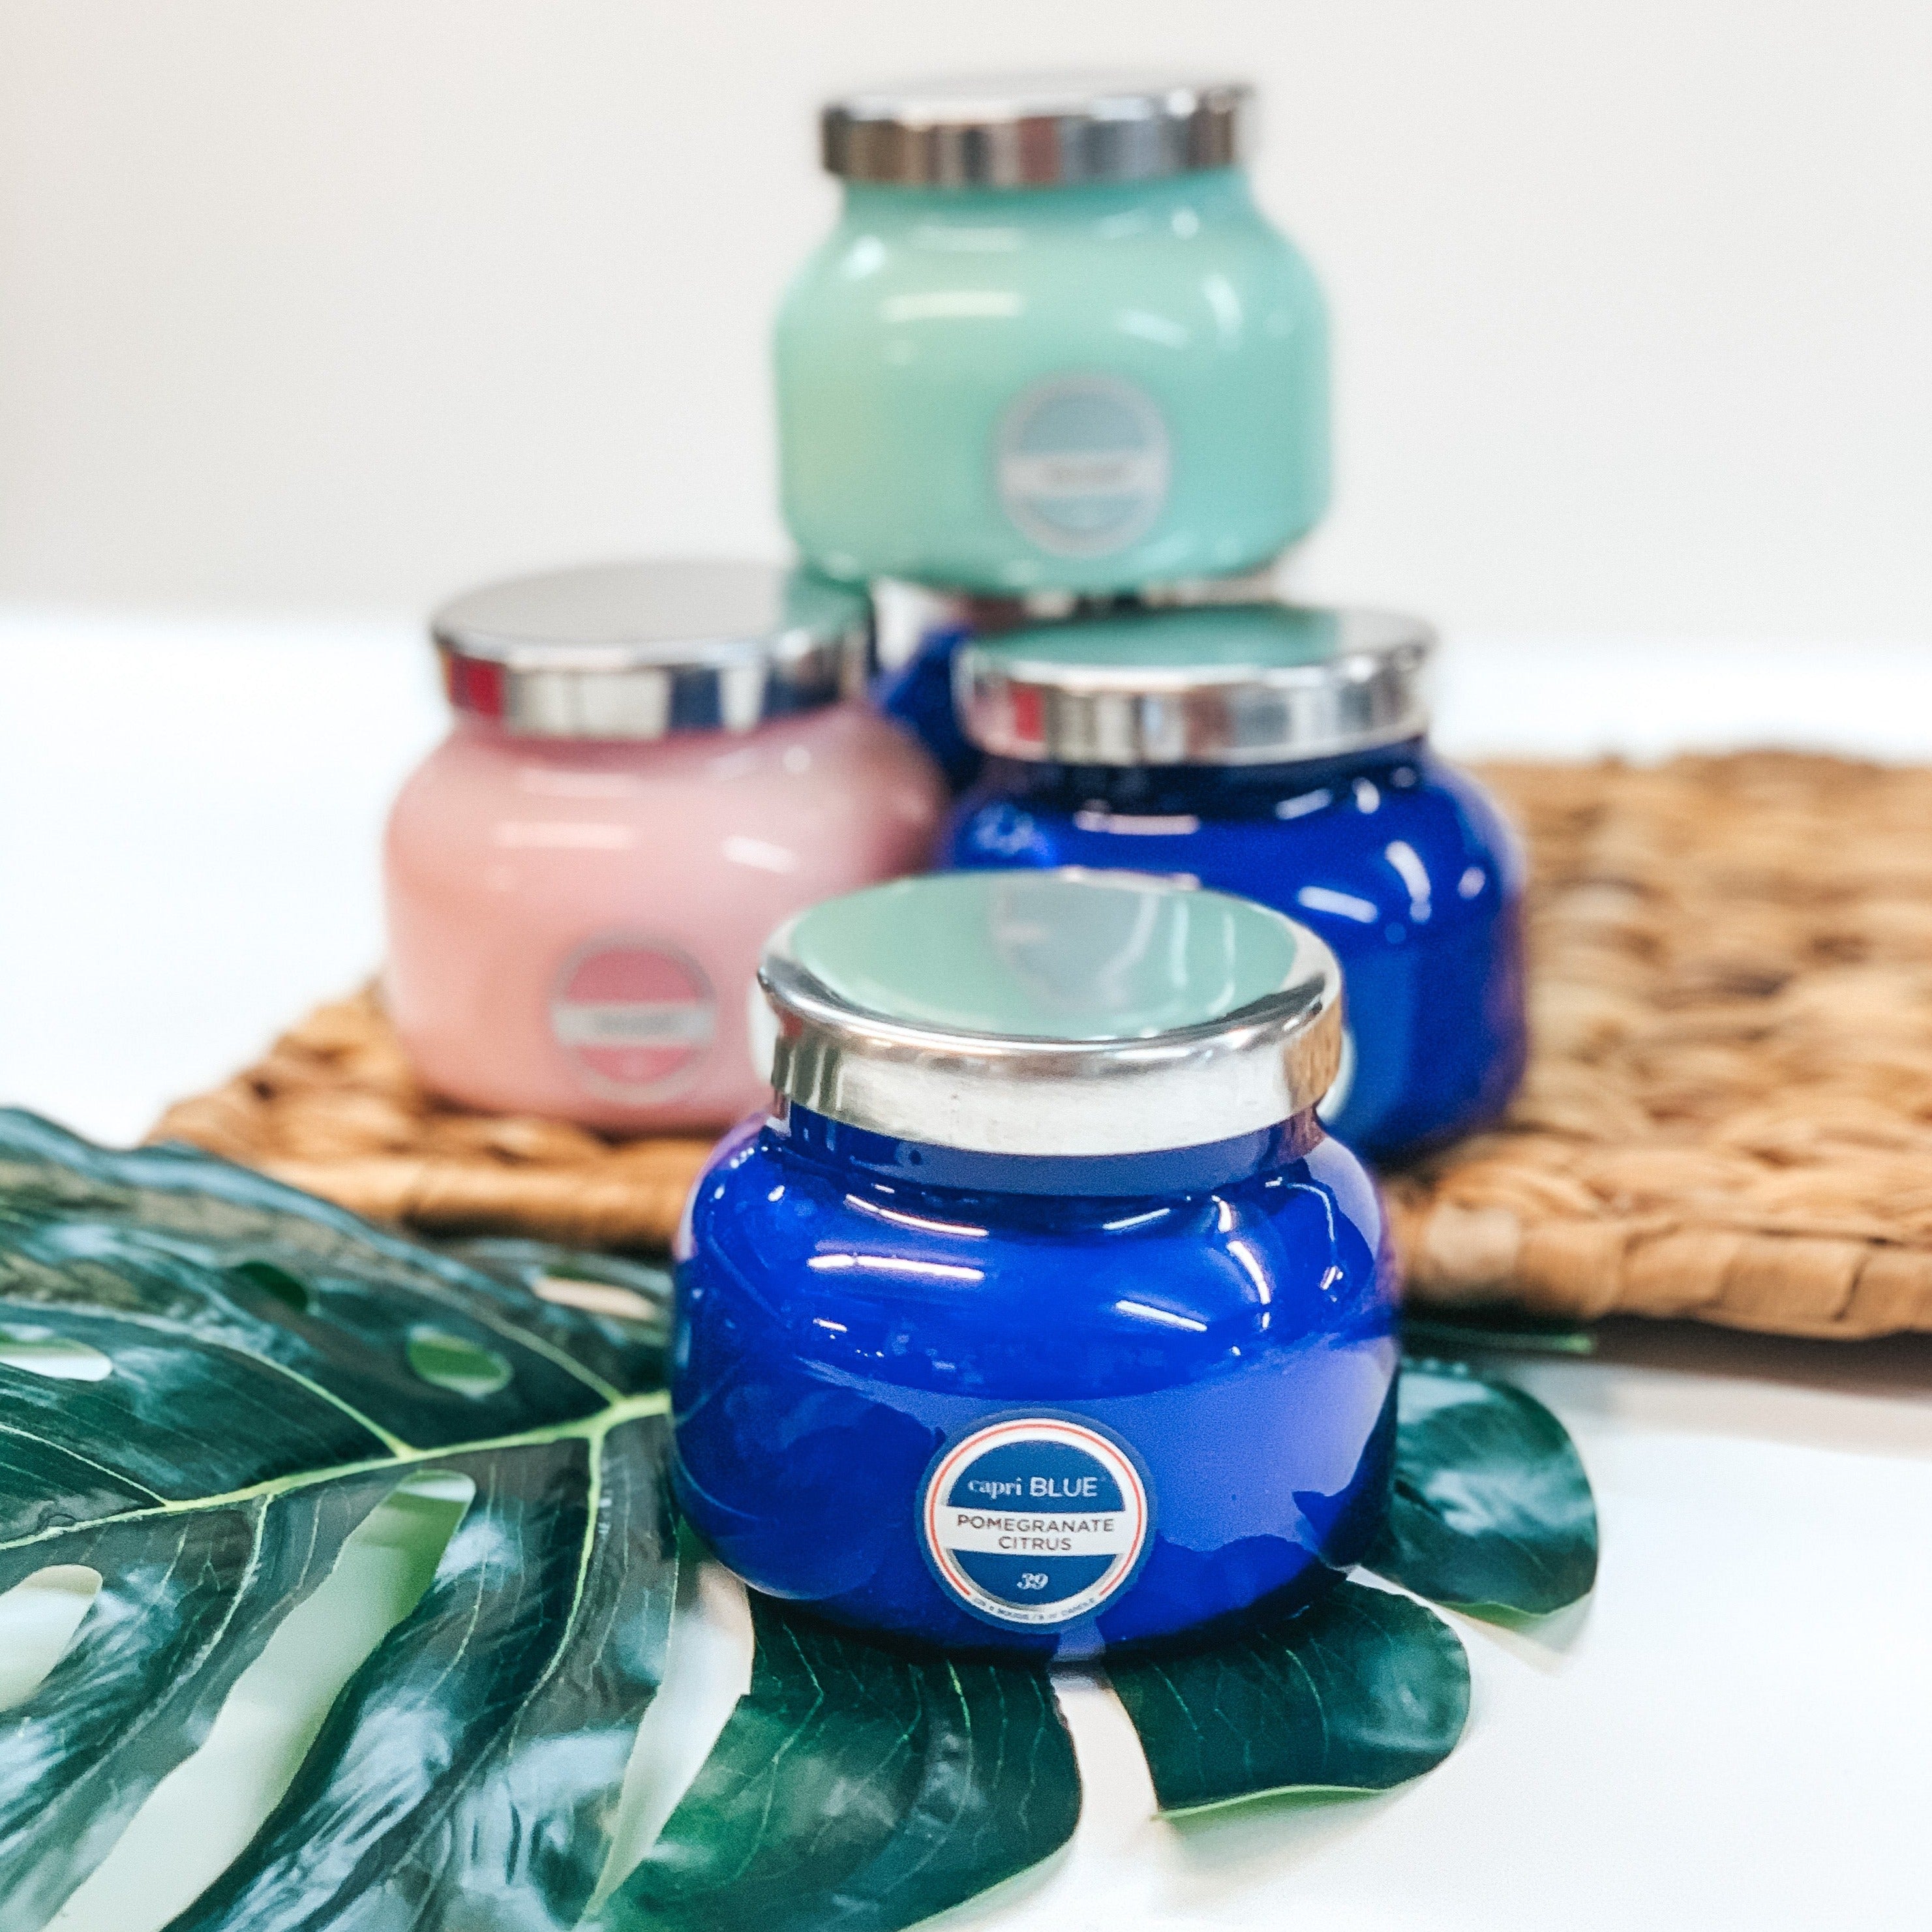 Capri Blue | 8 oz. Petite Jar Candle in Signature Blue | Various Scents - Giddy Up Glamour Boutique